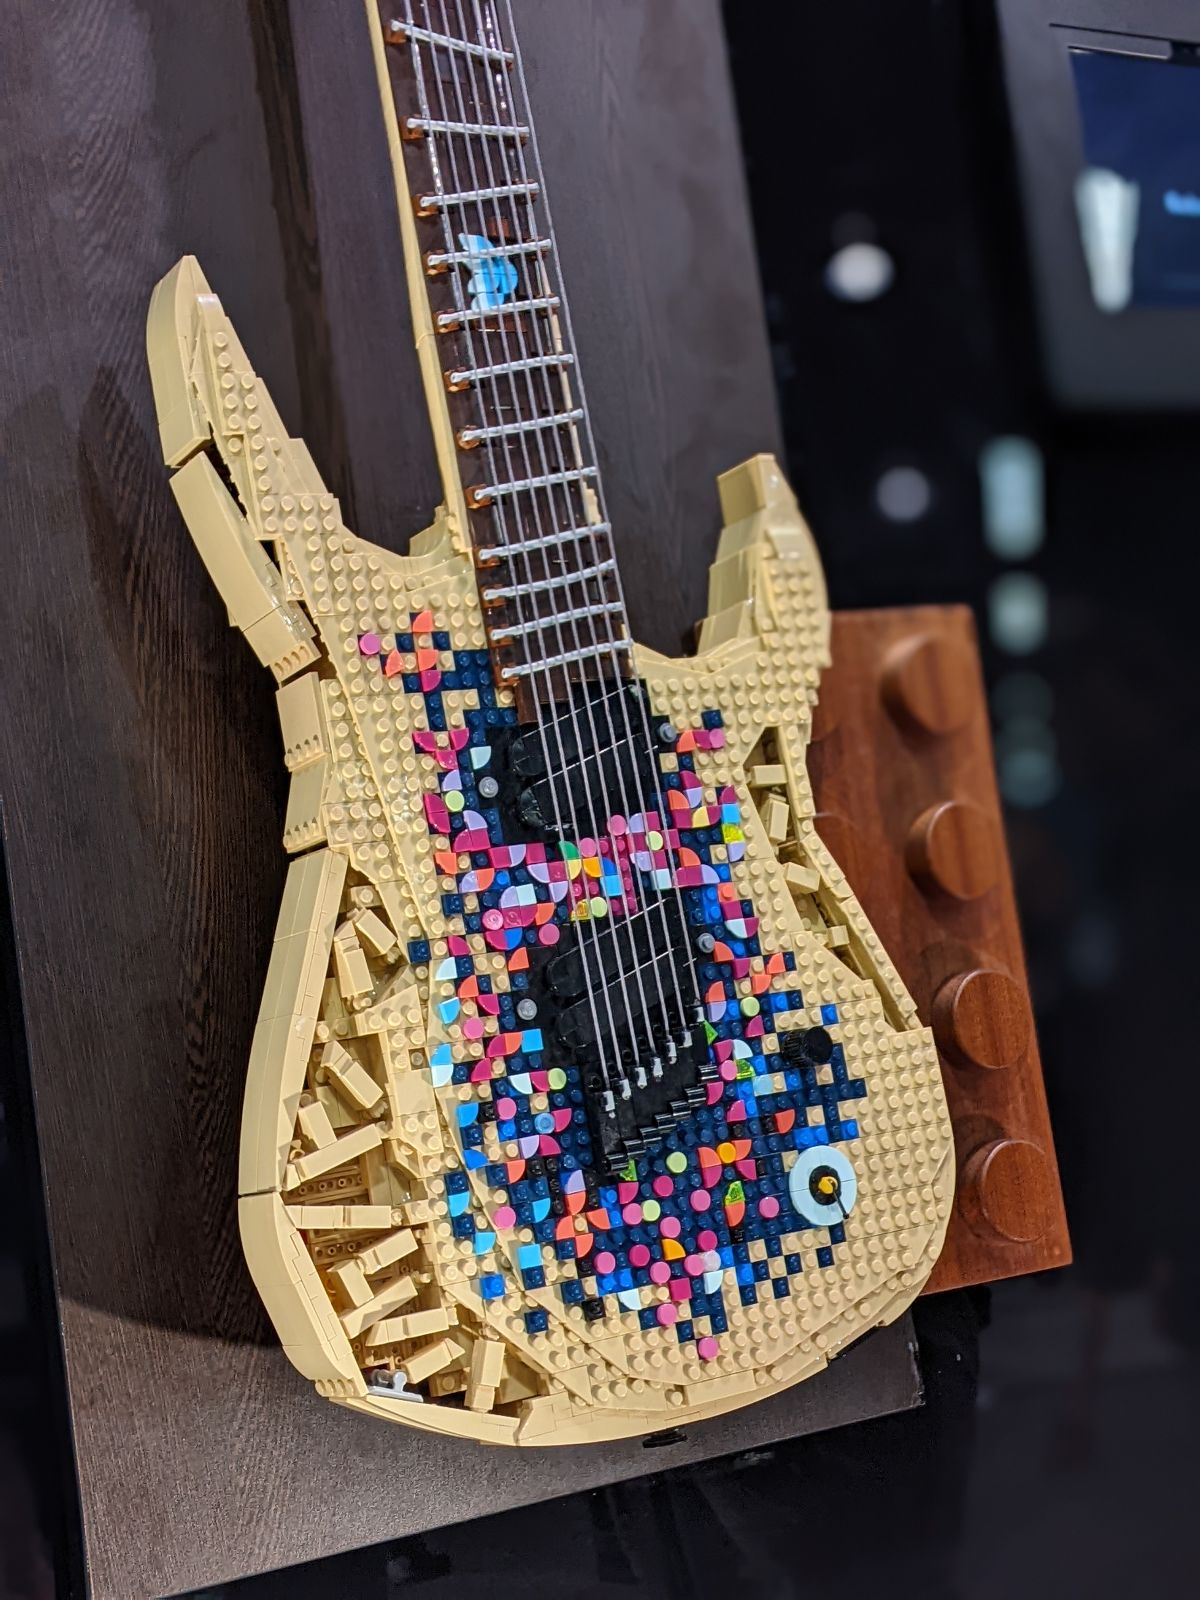 The Play Well, from OD Guitars